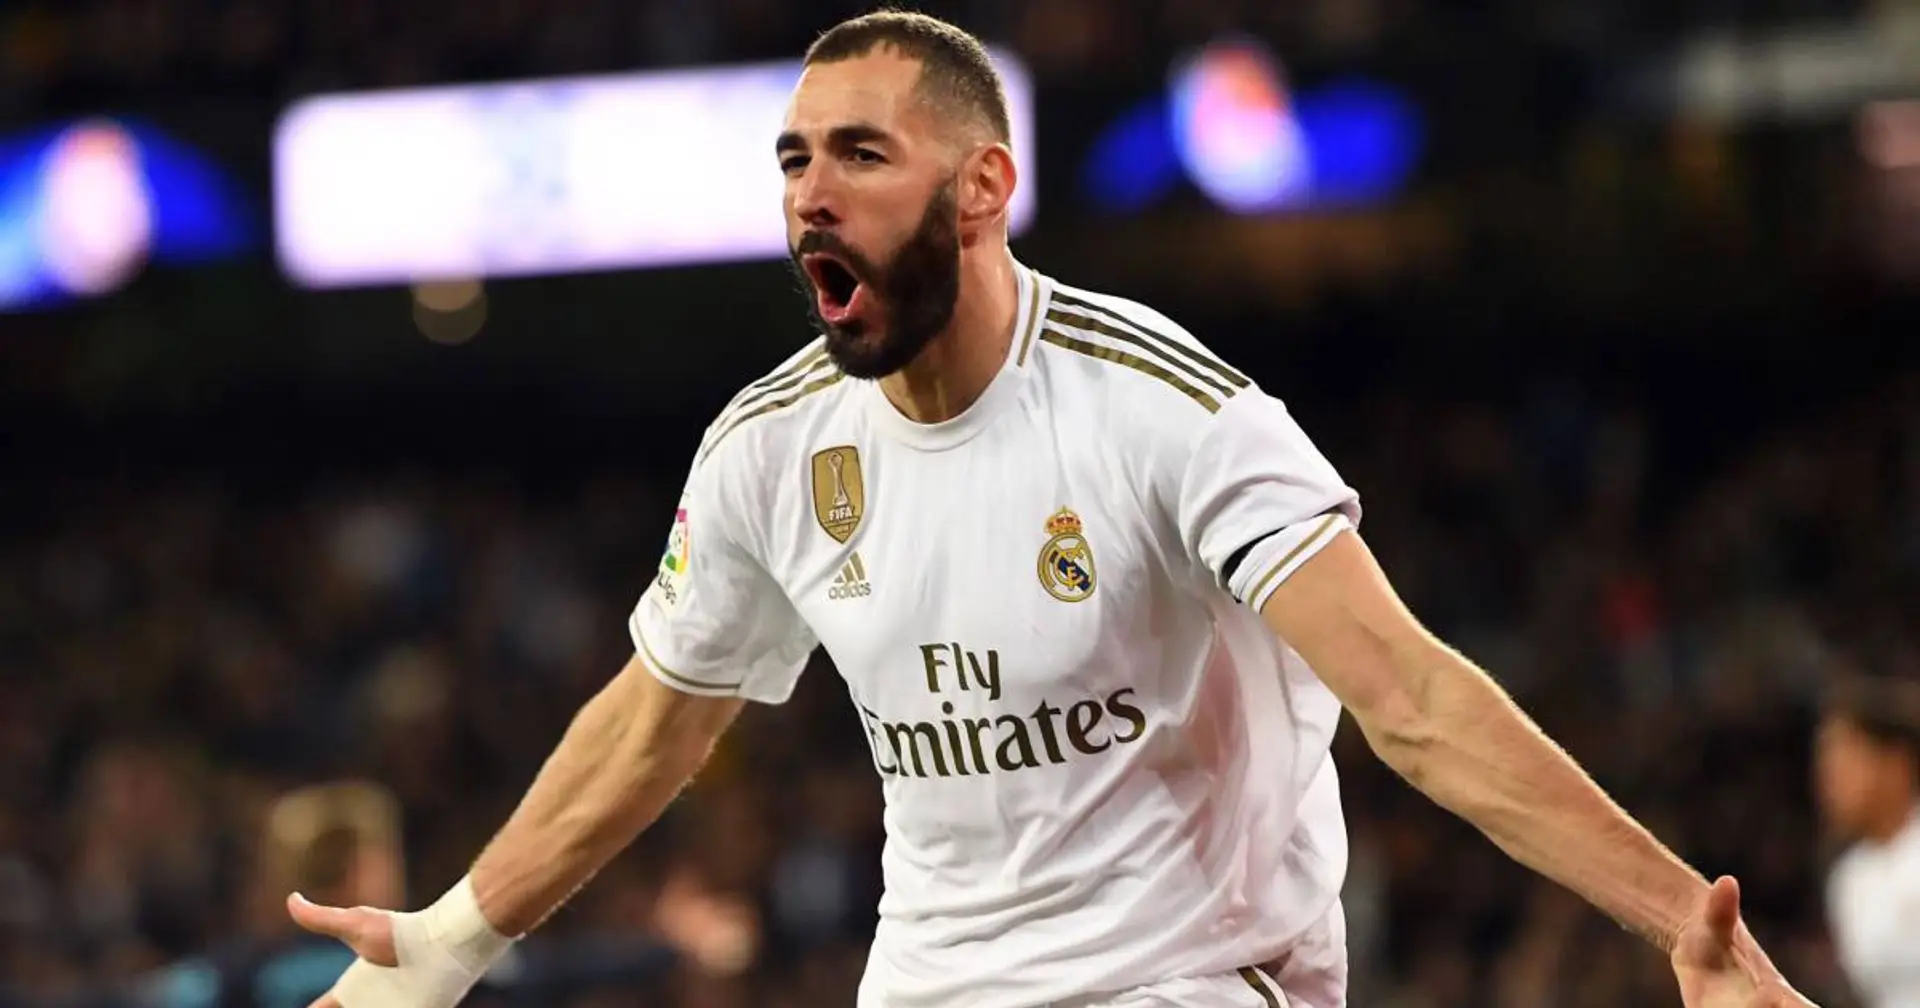 Creativity overload: Benzema ranks among top-5 most creative strikers in recent history